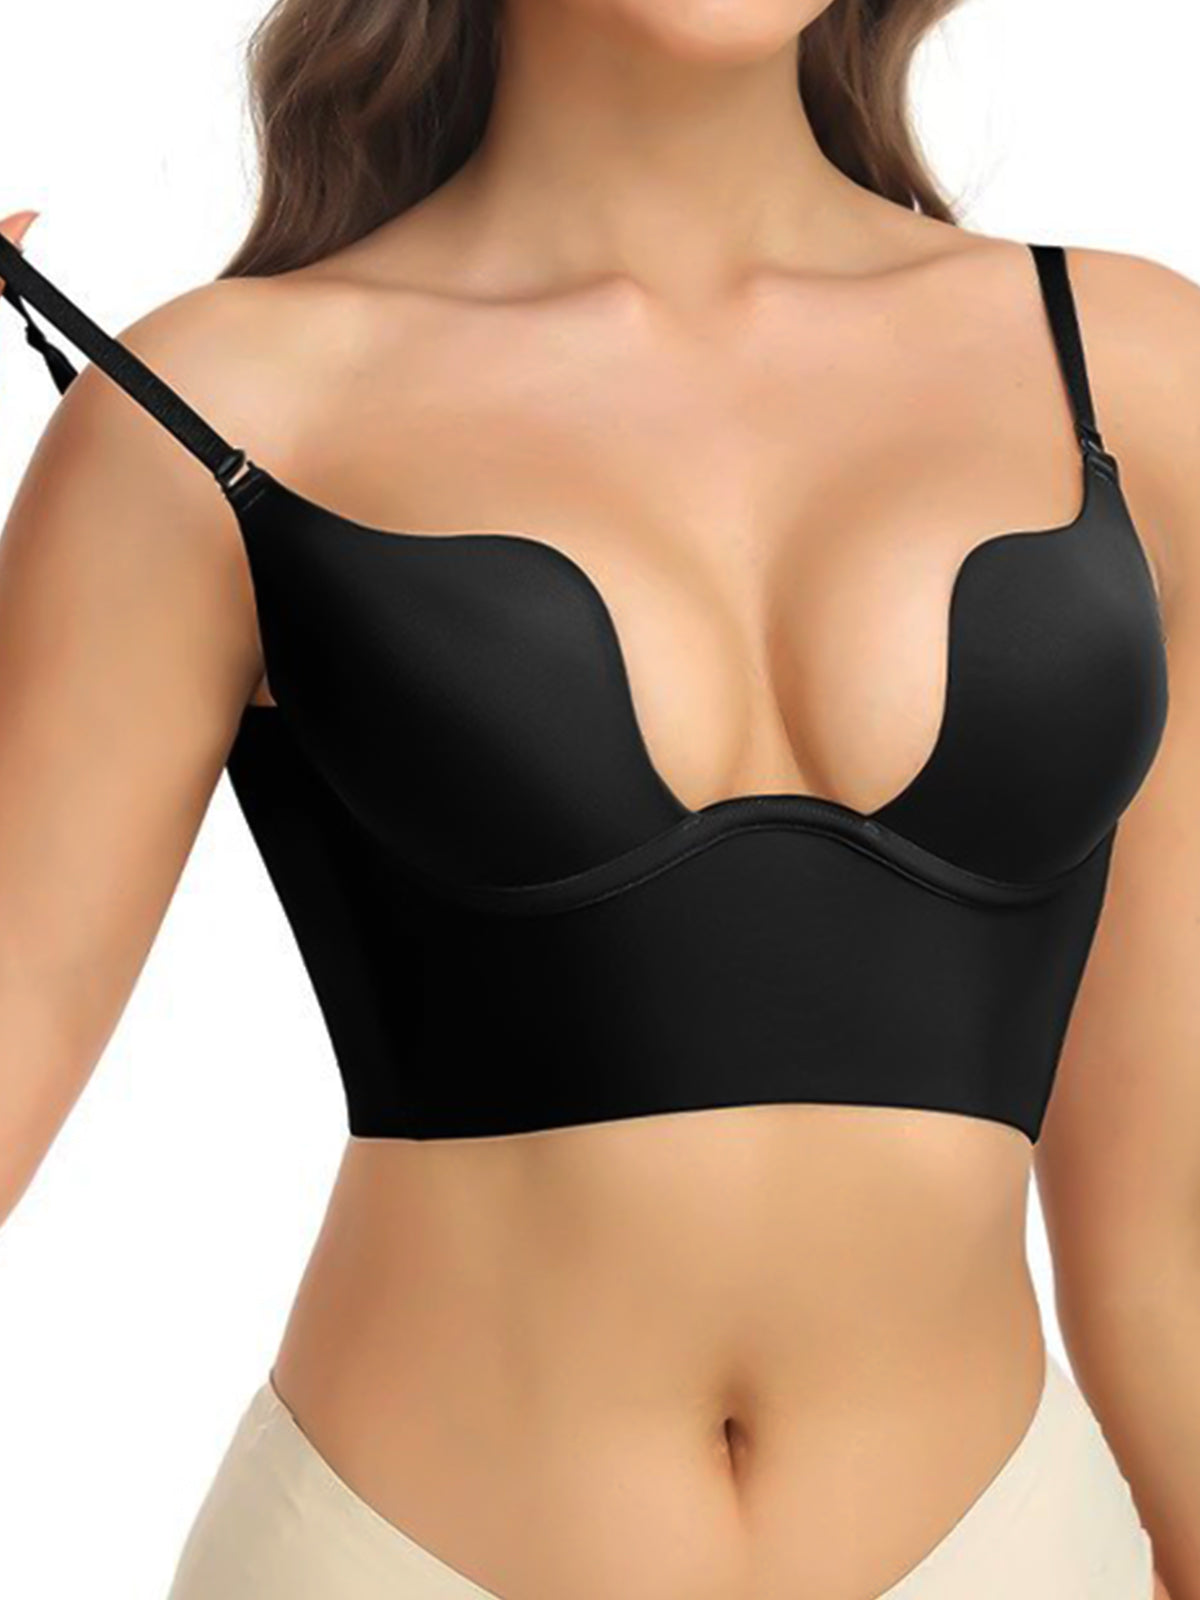 Midnightdivas - Invisible Pushup Bra <3 Most women find backless